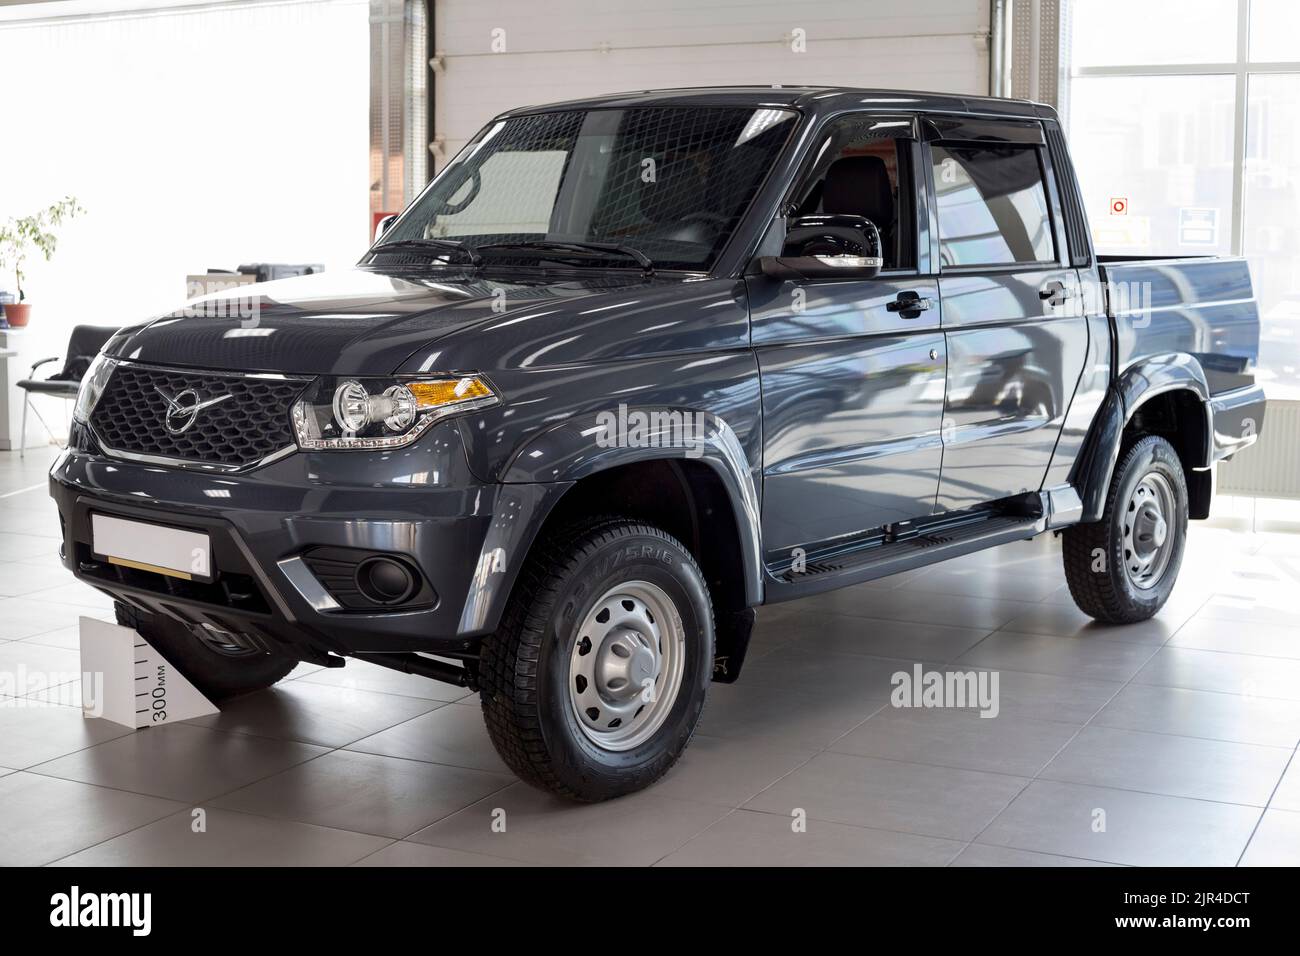 Russia, Izhevsk - August 20, 2021: UAZ showroom. New modern pick up UAZ Patriot in dealer showroom. Sollers automotive group. Front and side view. Stock Photo